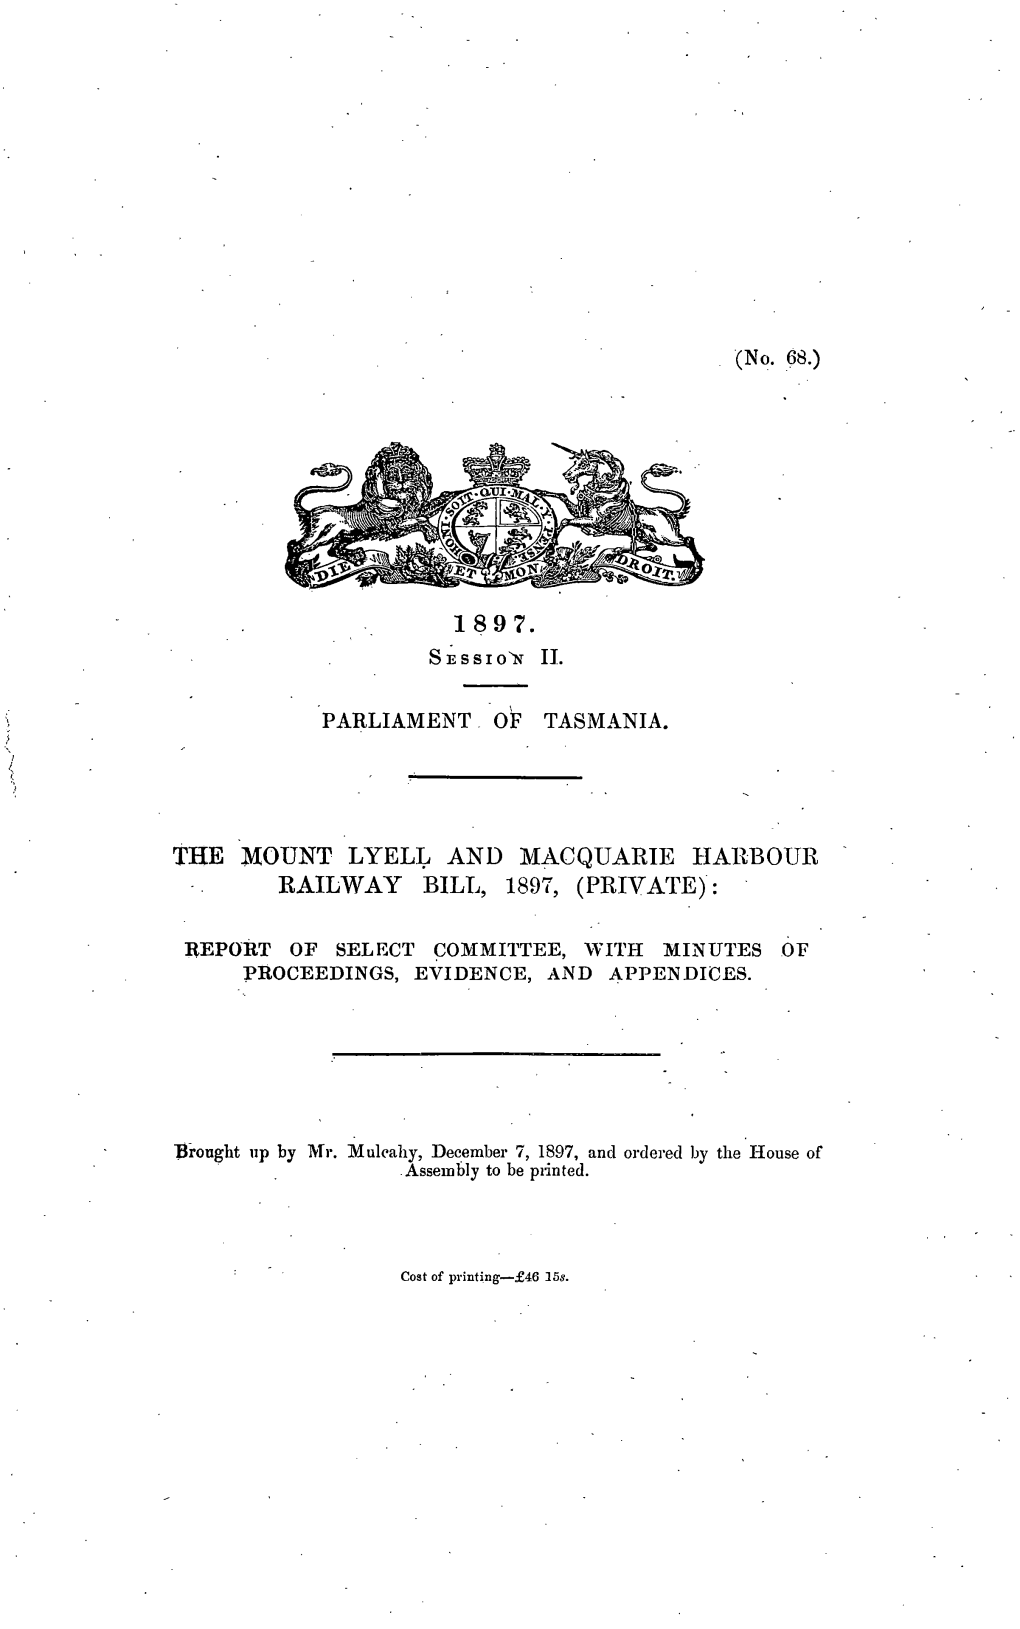 The Mount Lyell and Macquarie Harbour Railway Bill 1897